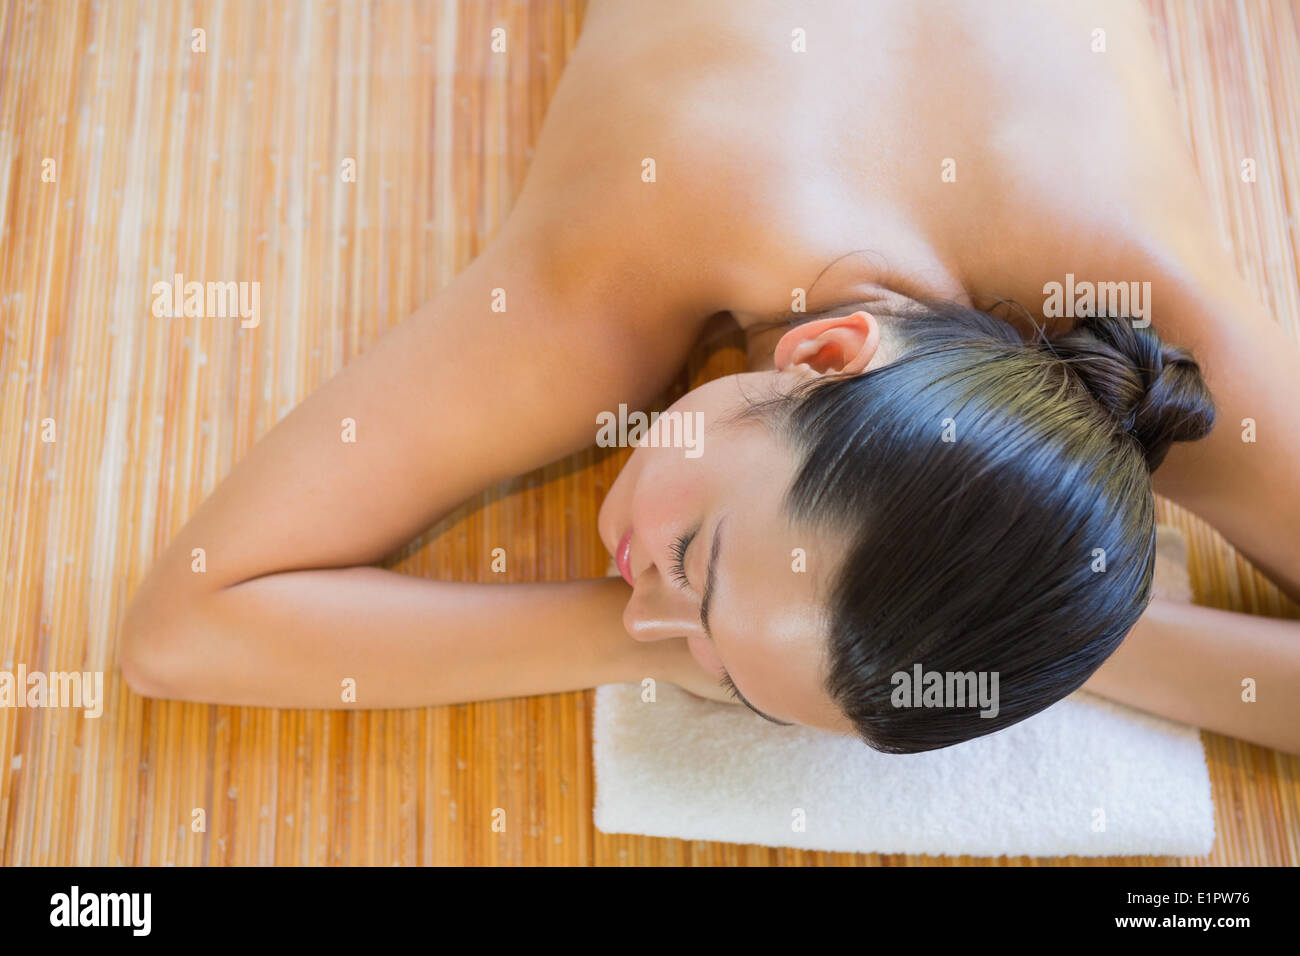 Content brunette relaxing on massage table Stock Photo